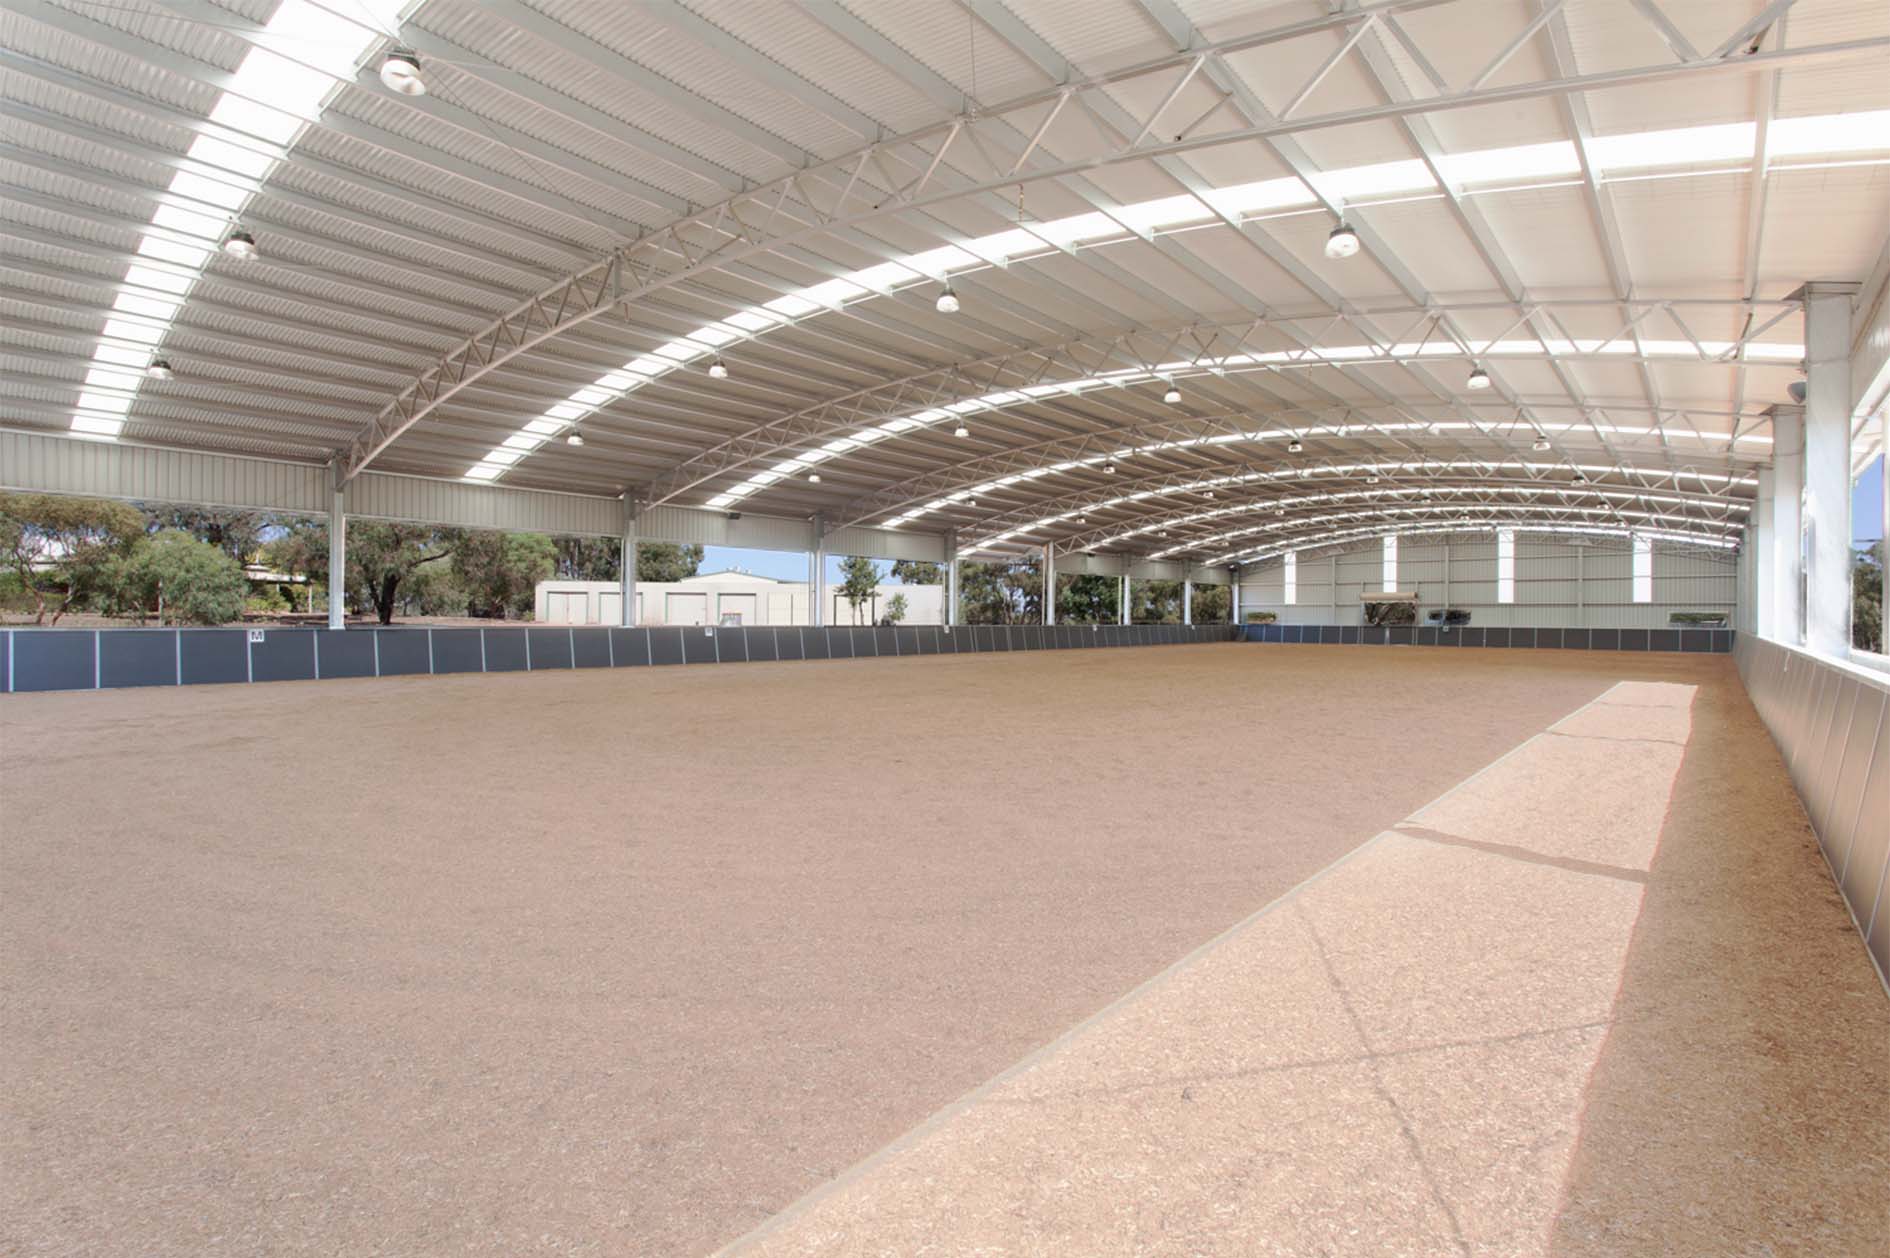 How much does it cost to build an indoor arena?